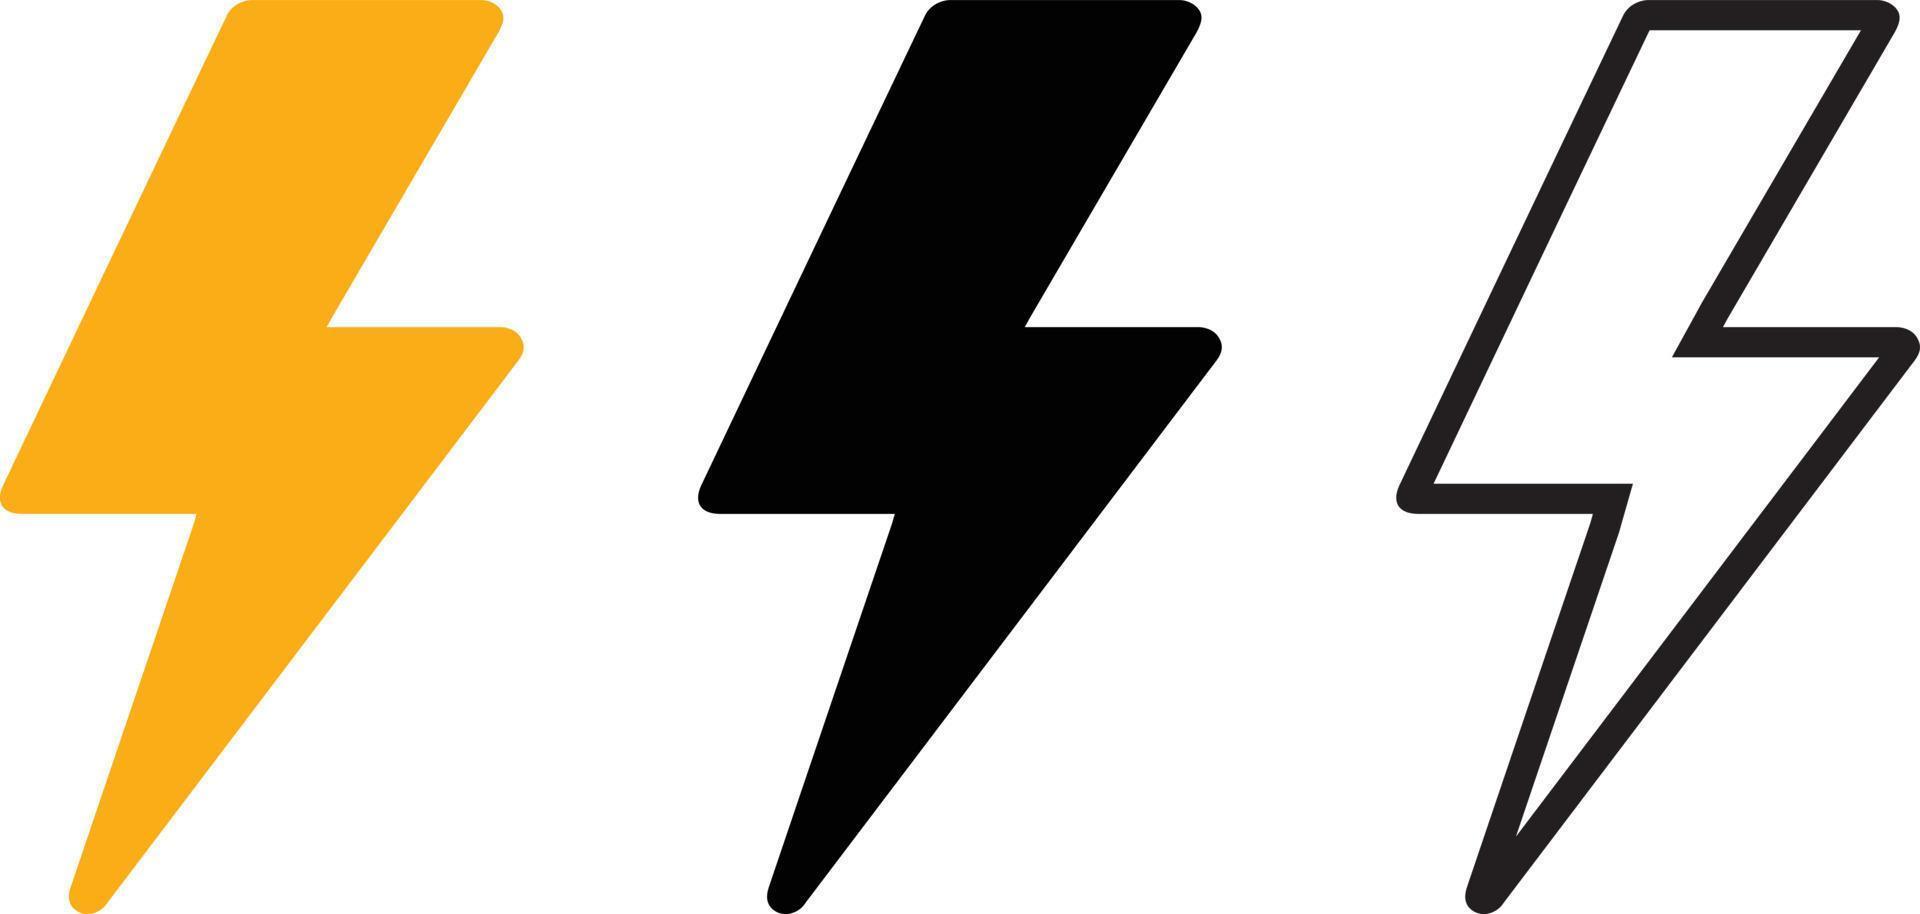 Flash icons collection. Bolt logo. Electric symbols. Electric lightning vector